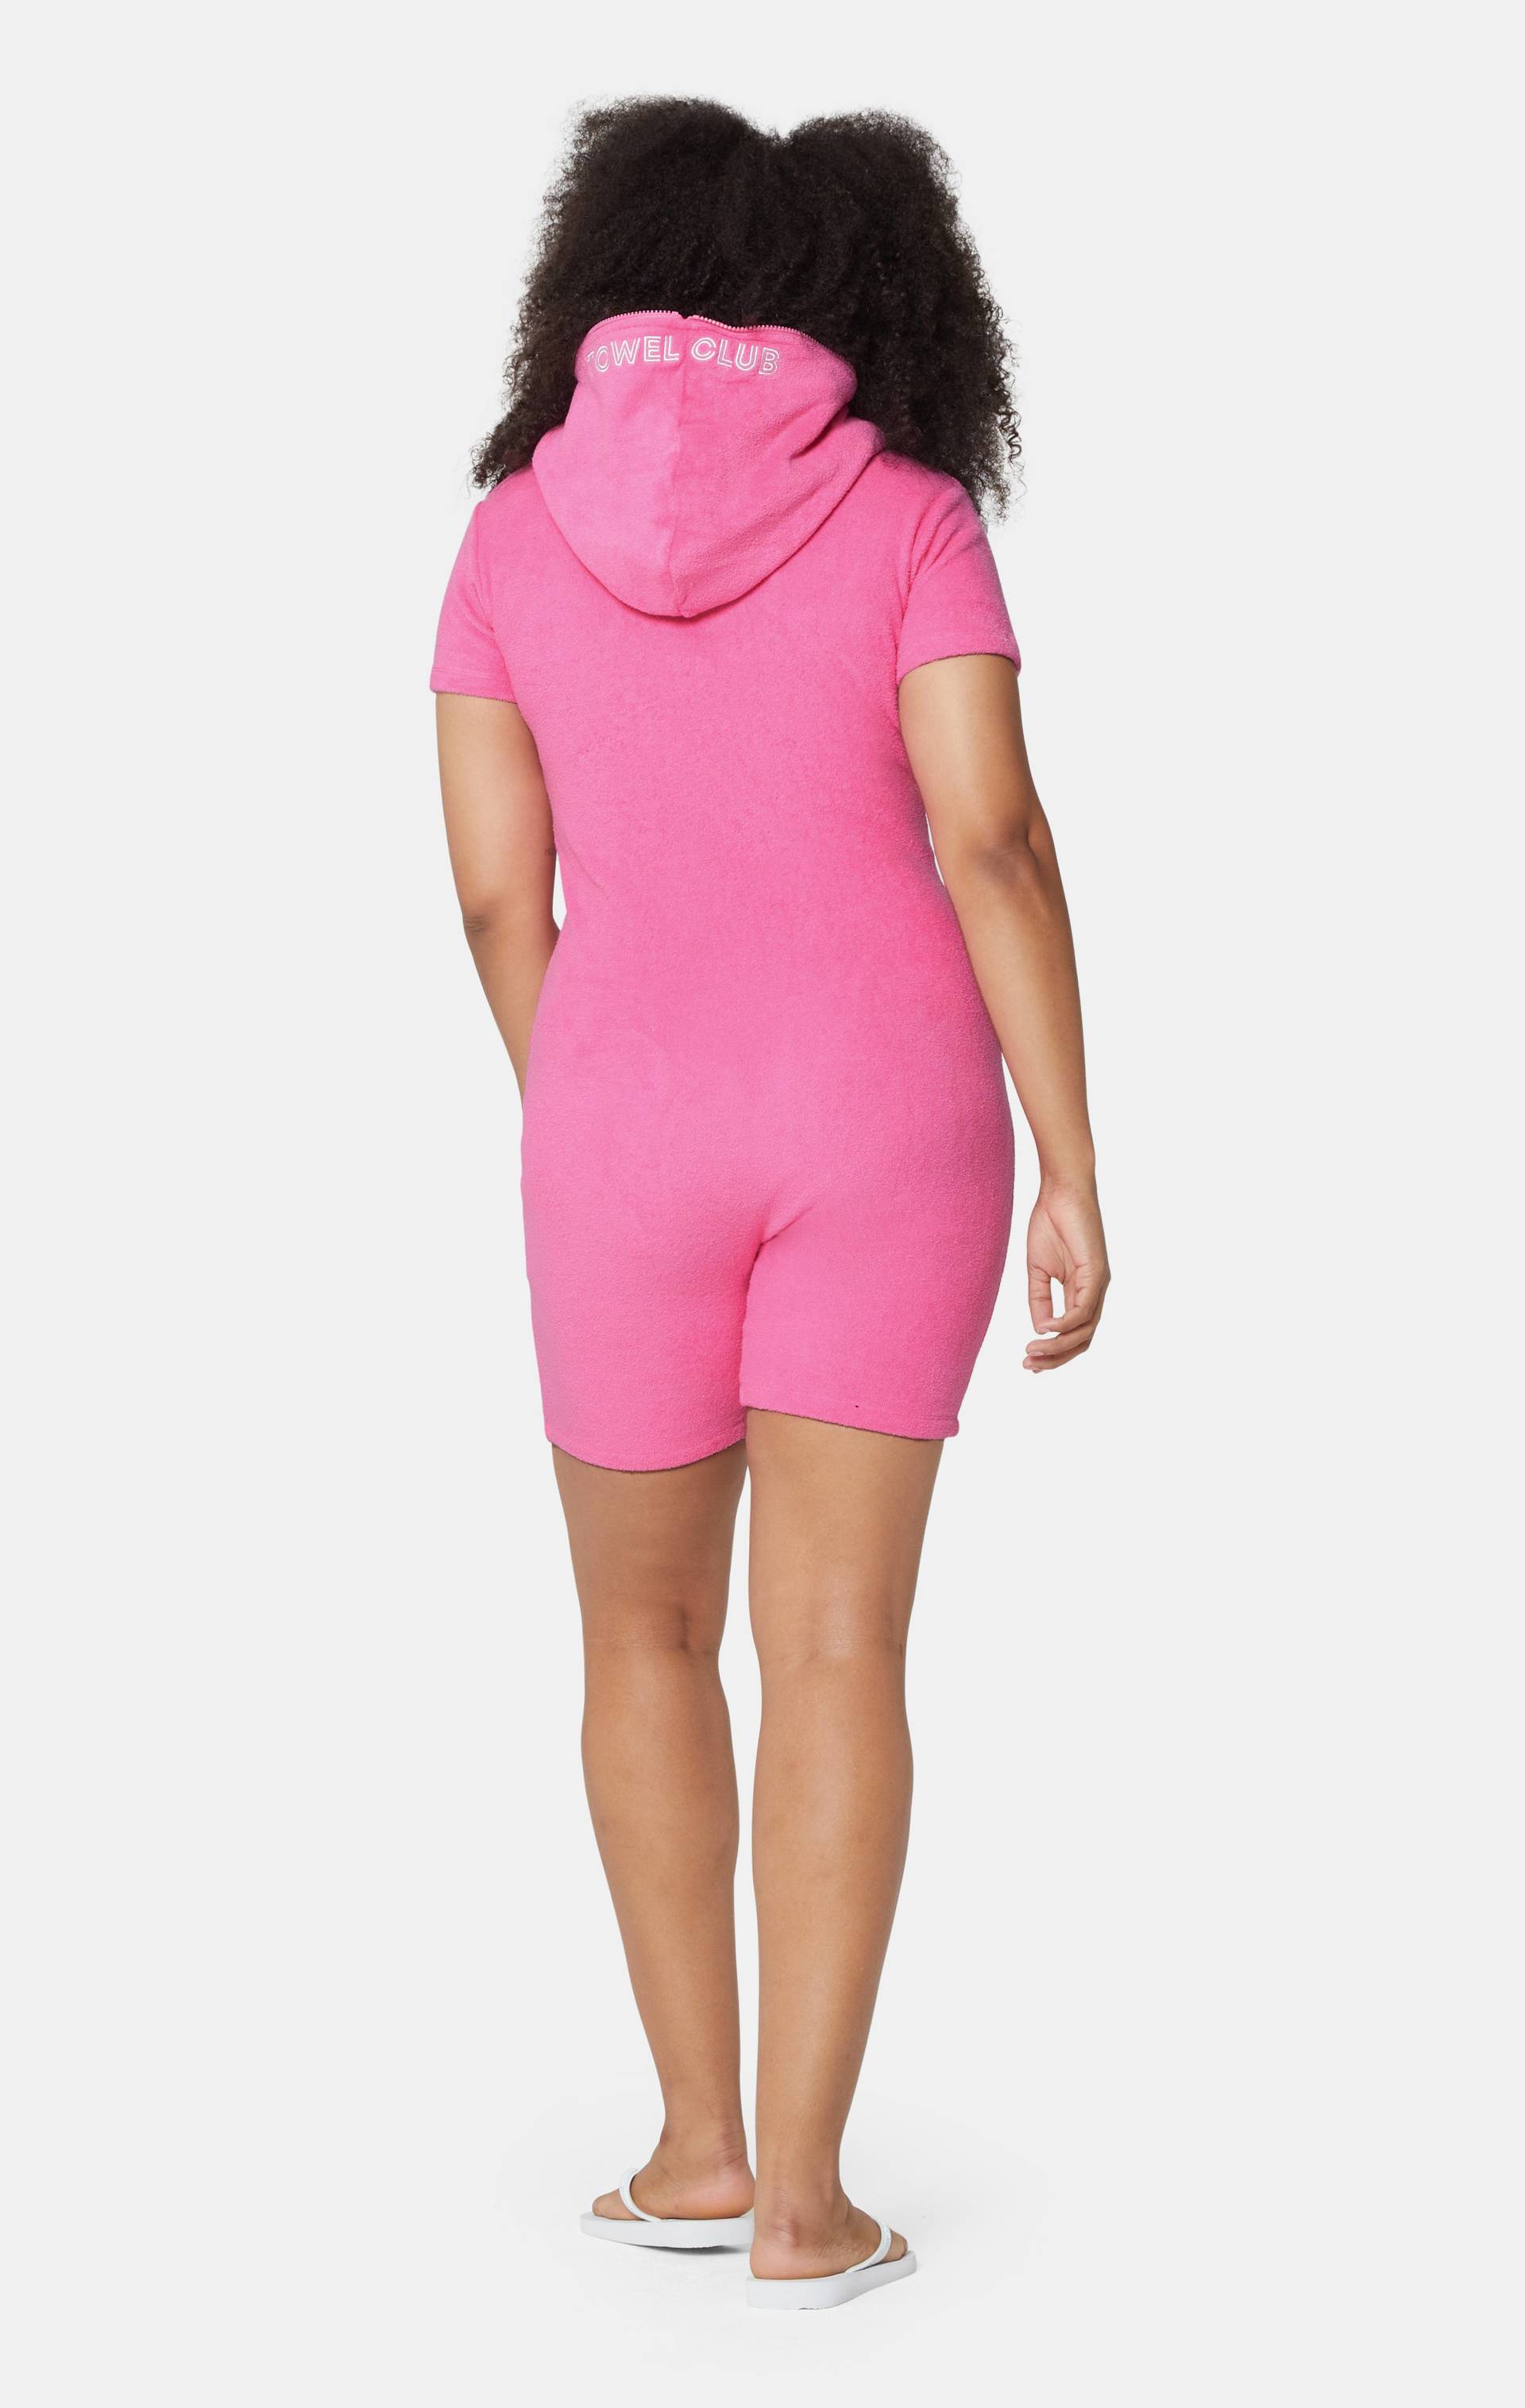 Onepiece Towel Club Fitted Short Jumpsuit Pink - 10